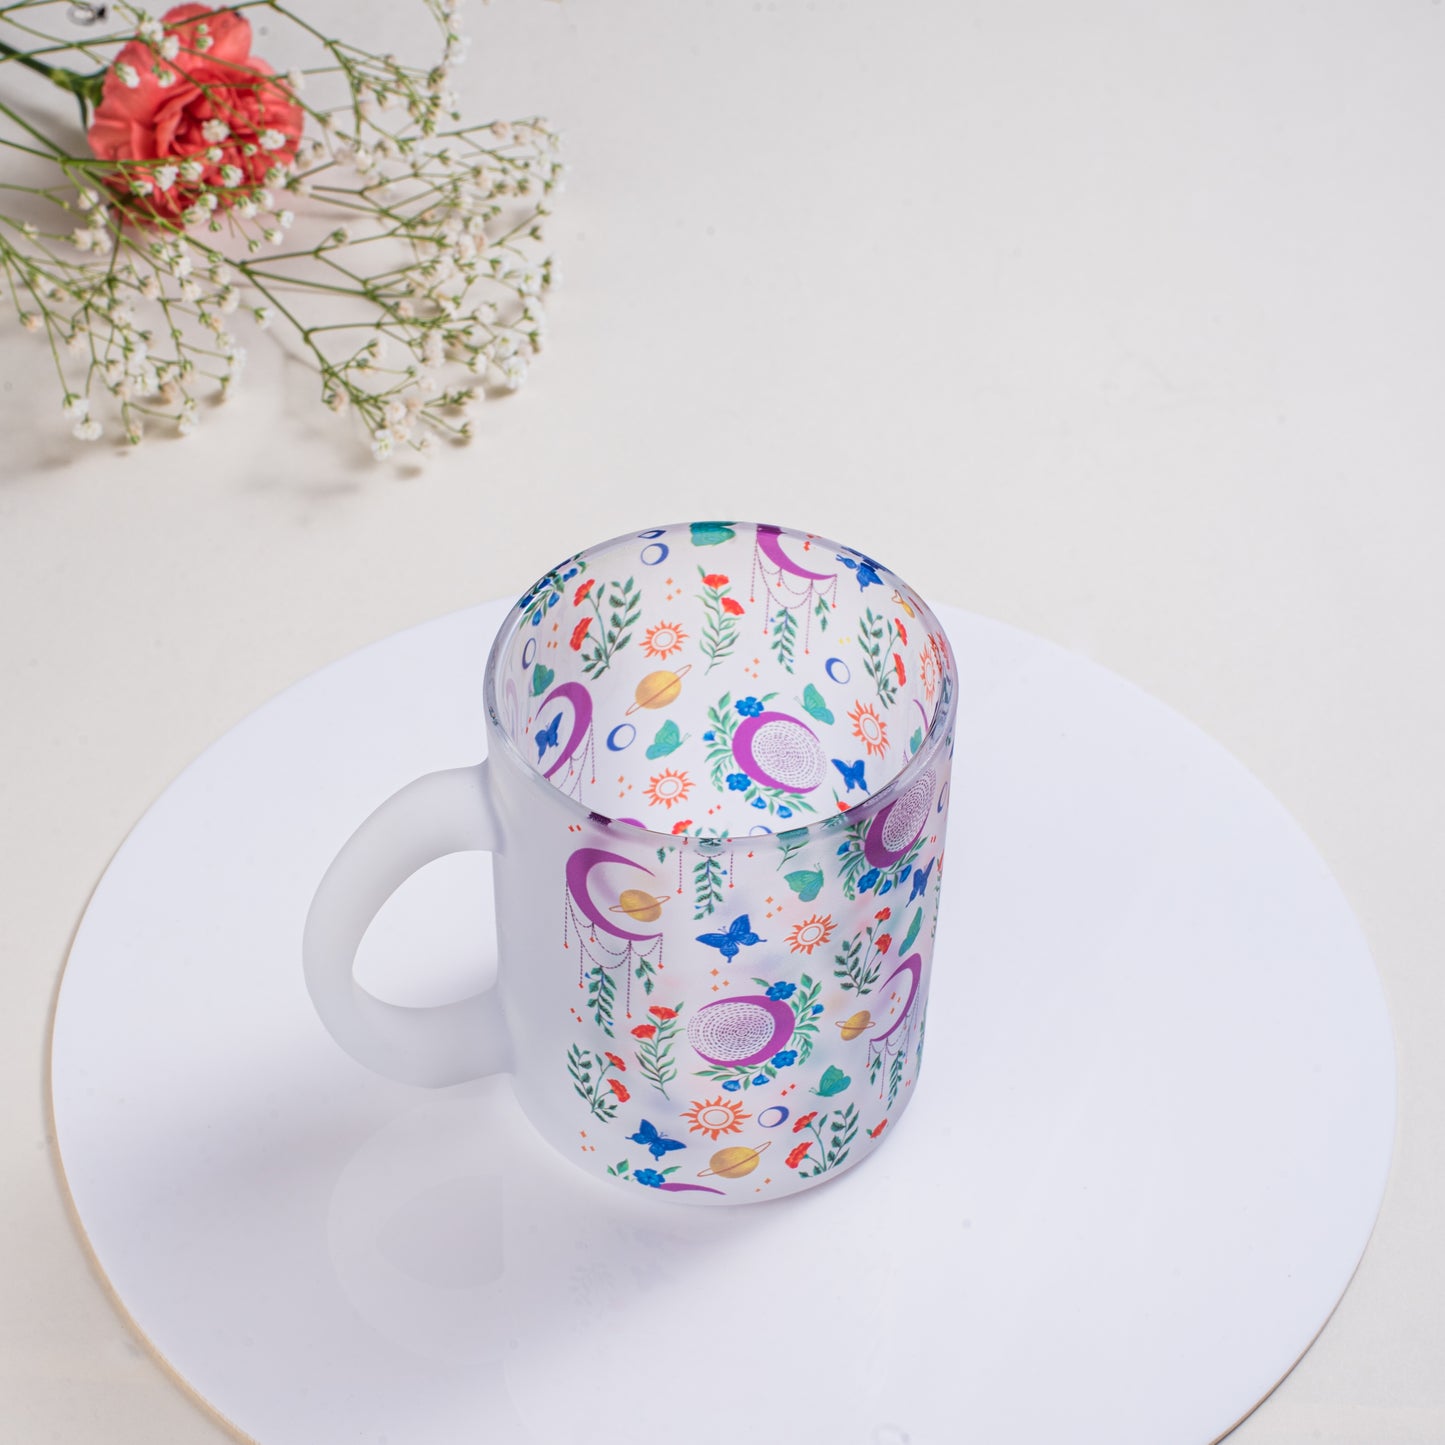 The Moon Child Frosted Glass Mug